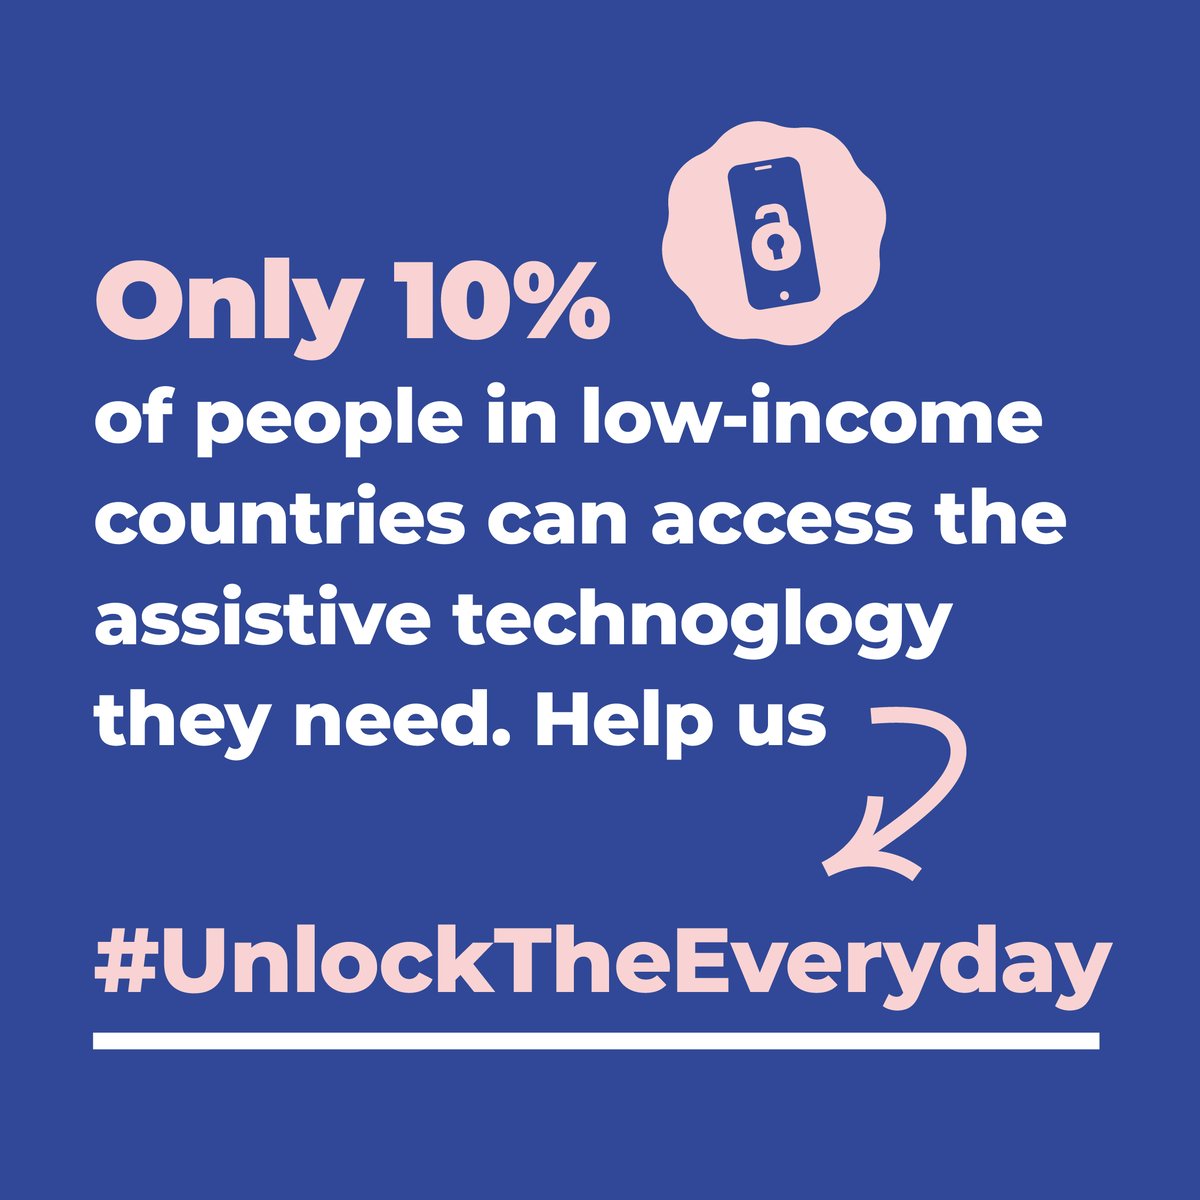 Assistive technology can transform lives. Everyone who needs it should have access. We’re supporting #UnlockTheEveryday to improve access for everyone. It’s time for change. unlocktheeveryday.org